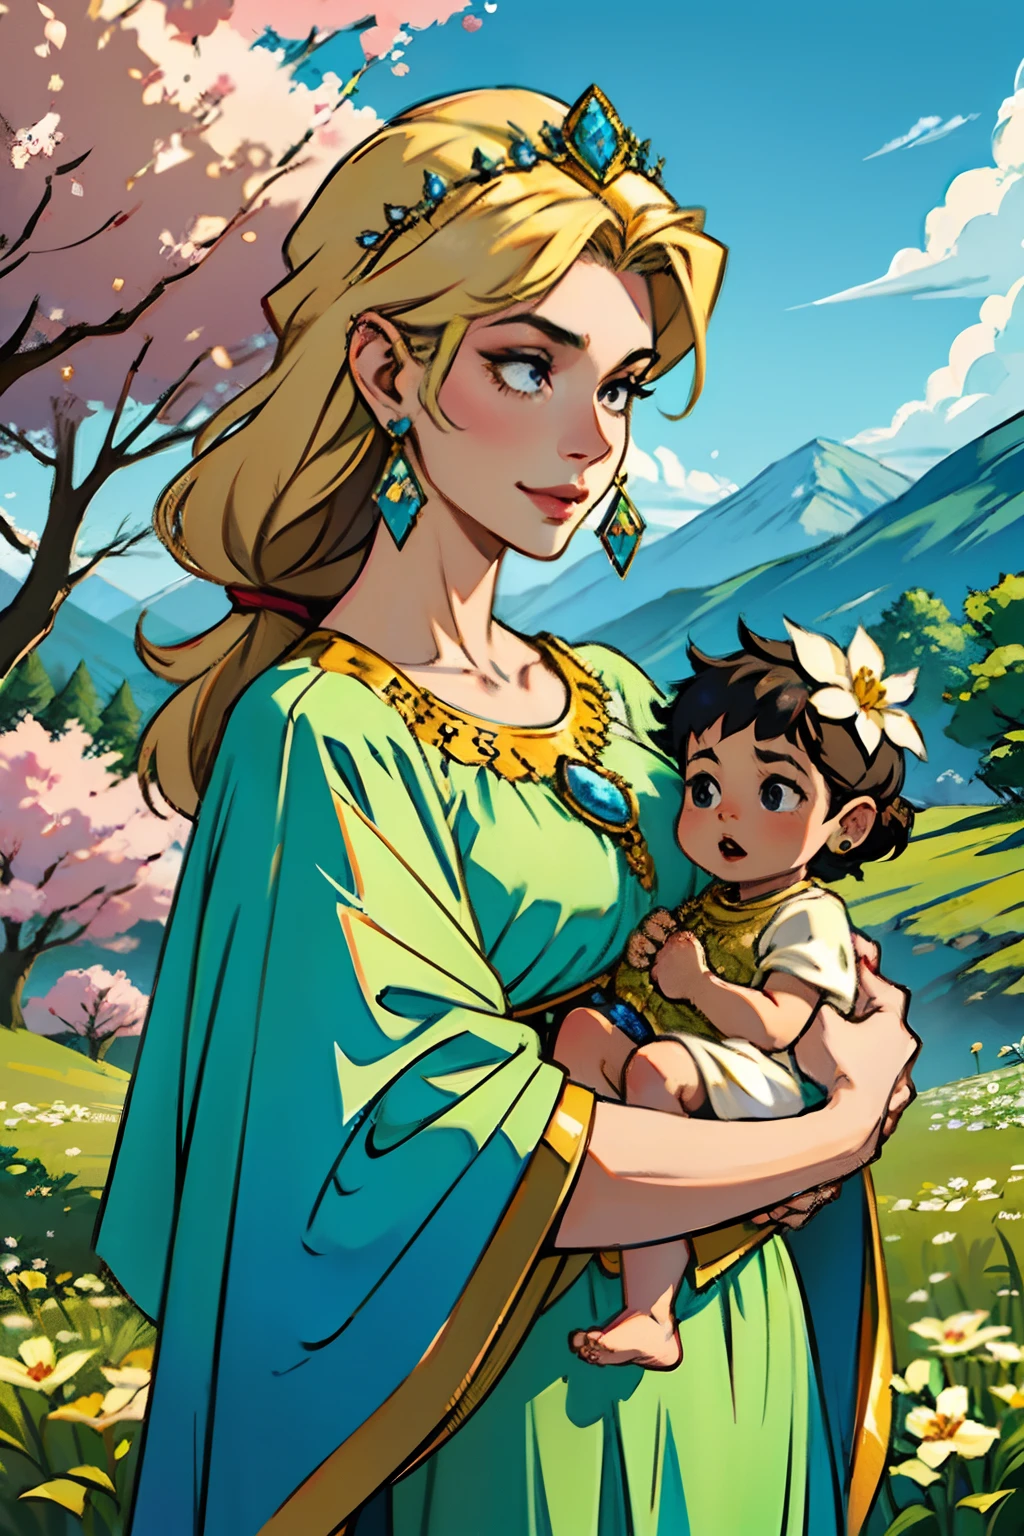 A woman who is a young mother, holding her baby, wearing a jeweled crown and jeweled earrings, background is springtime landscape, mood is prosperous, wealthy, nurturing, nourishing, daytime light, character design.